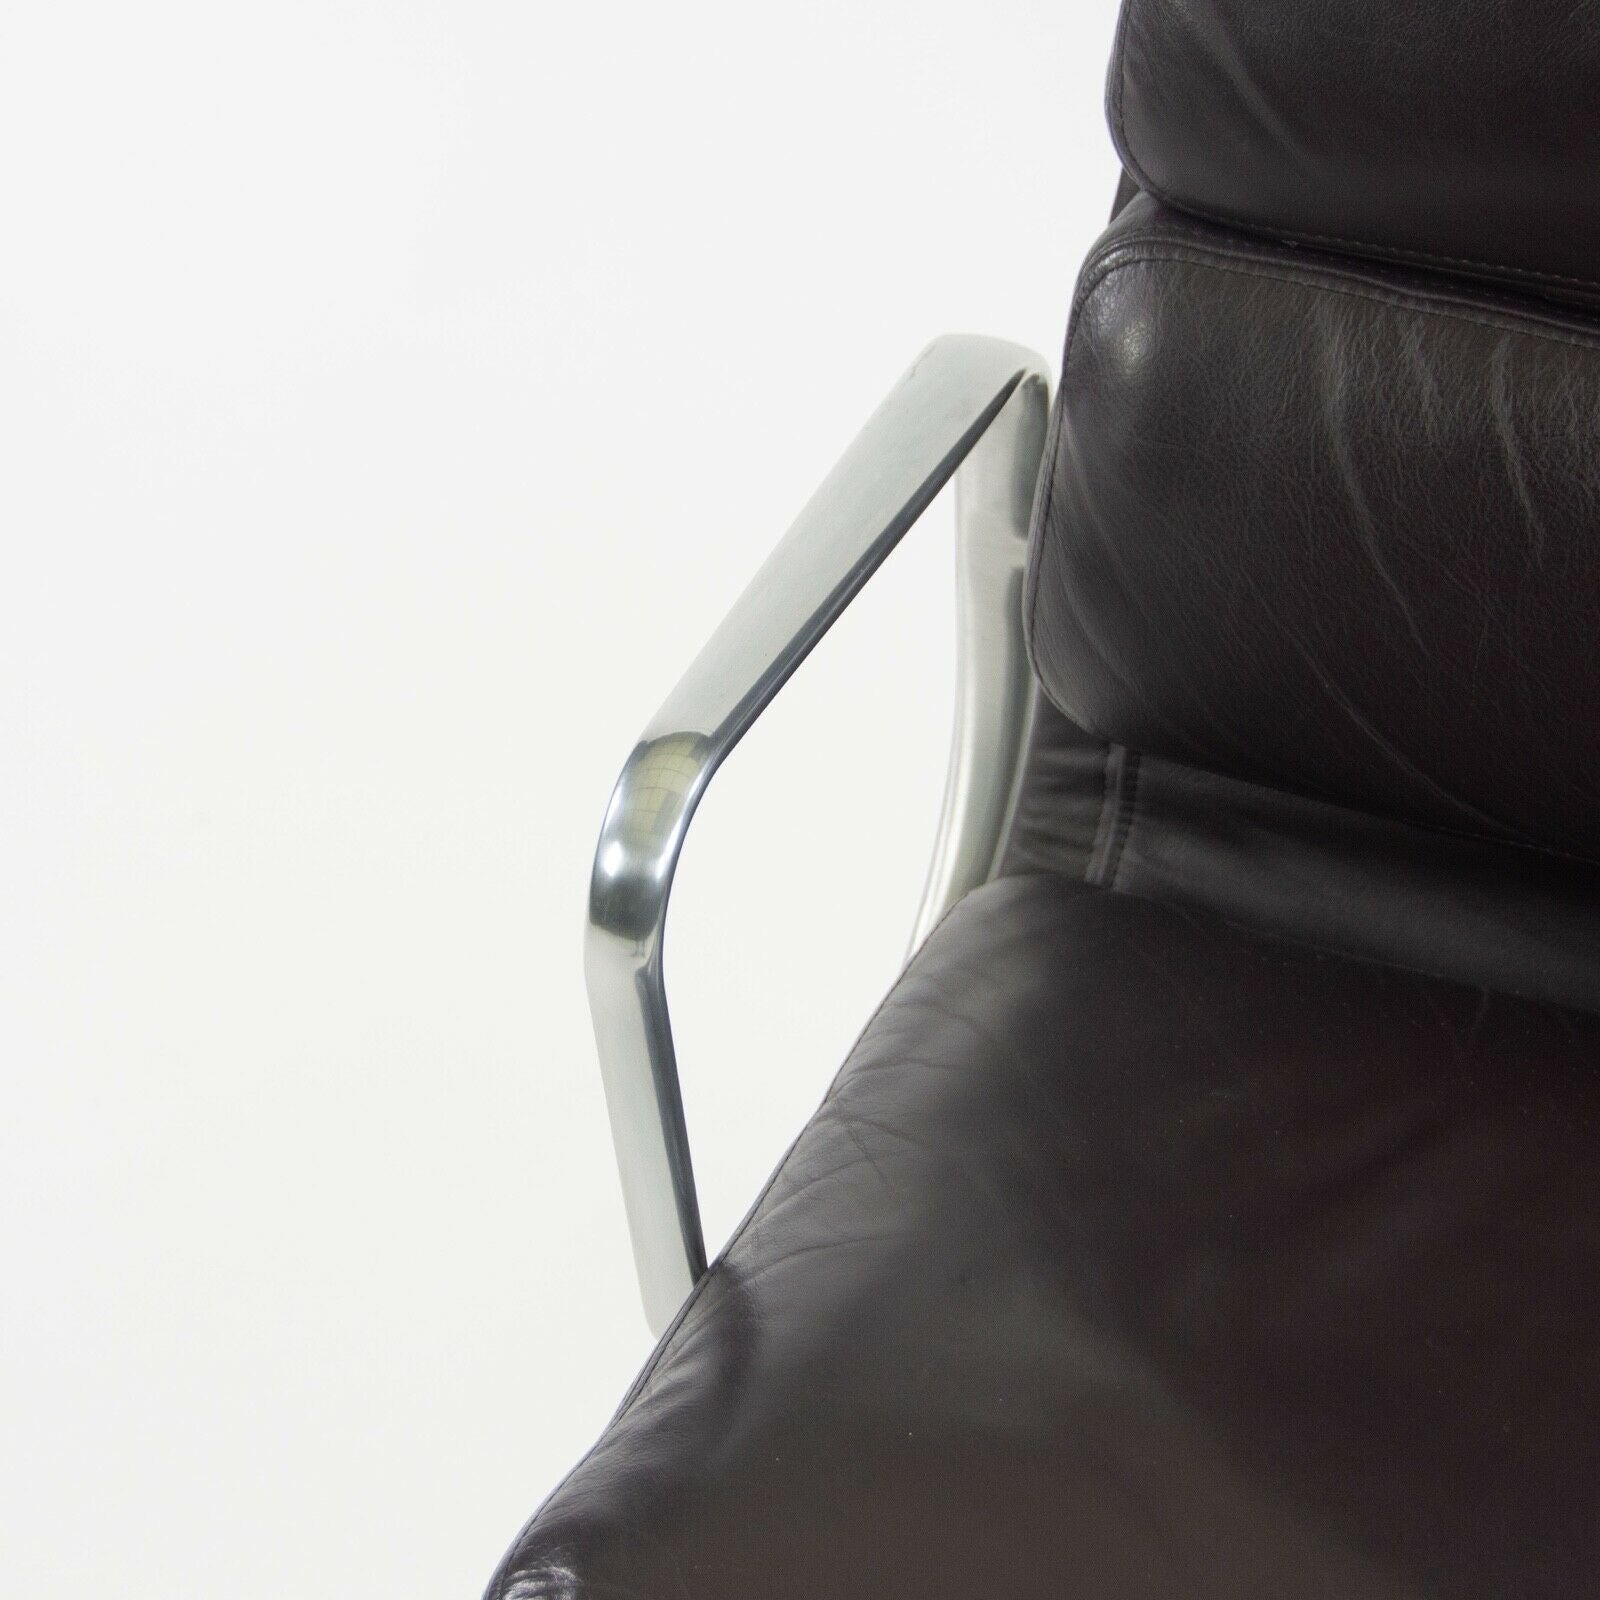 SOLD 1996 Eggplant Eames Herman Miller High Back Soft Pad Aluminum Group Chair